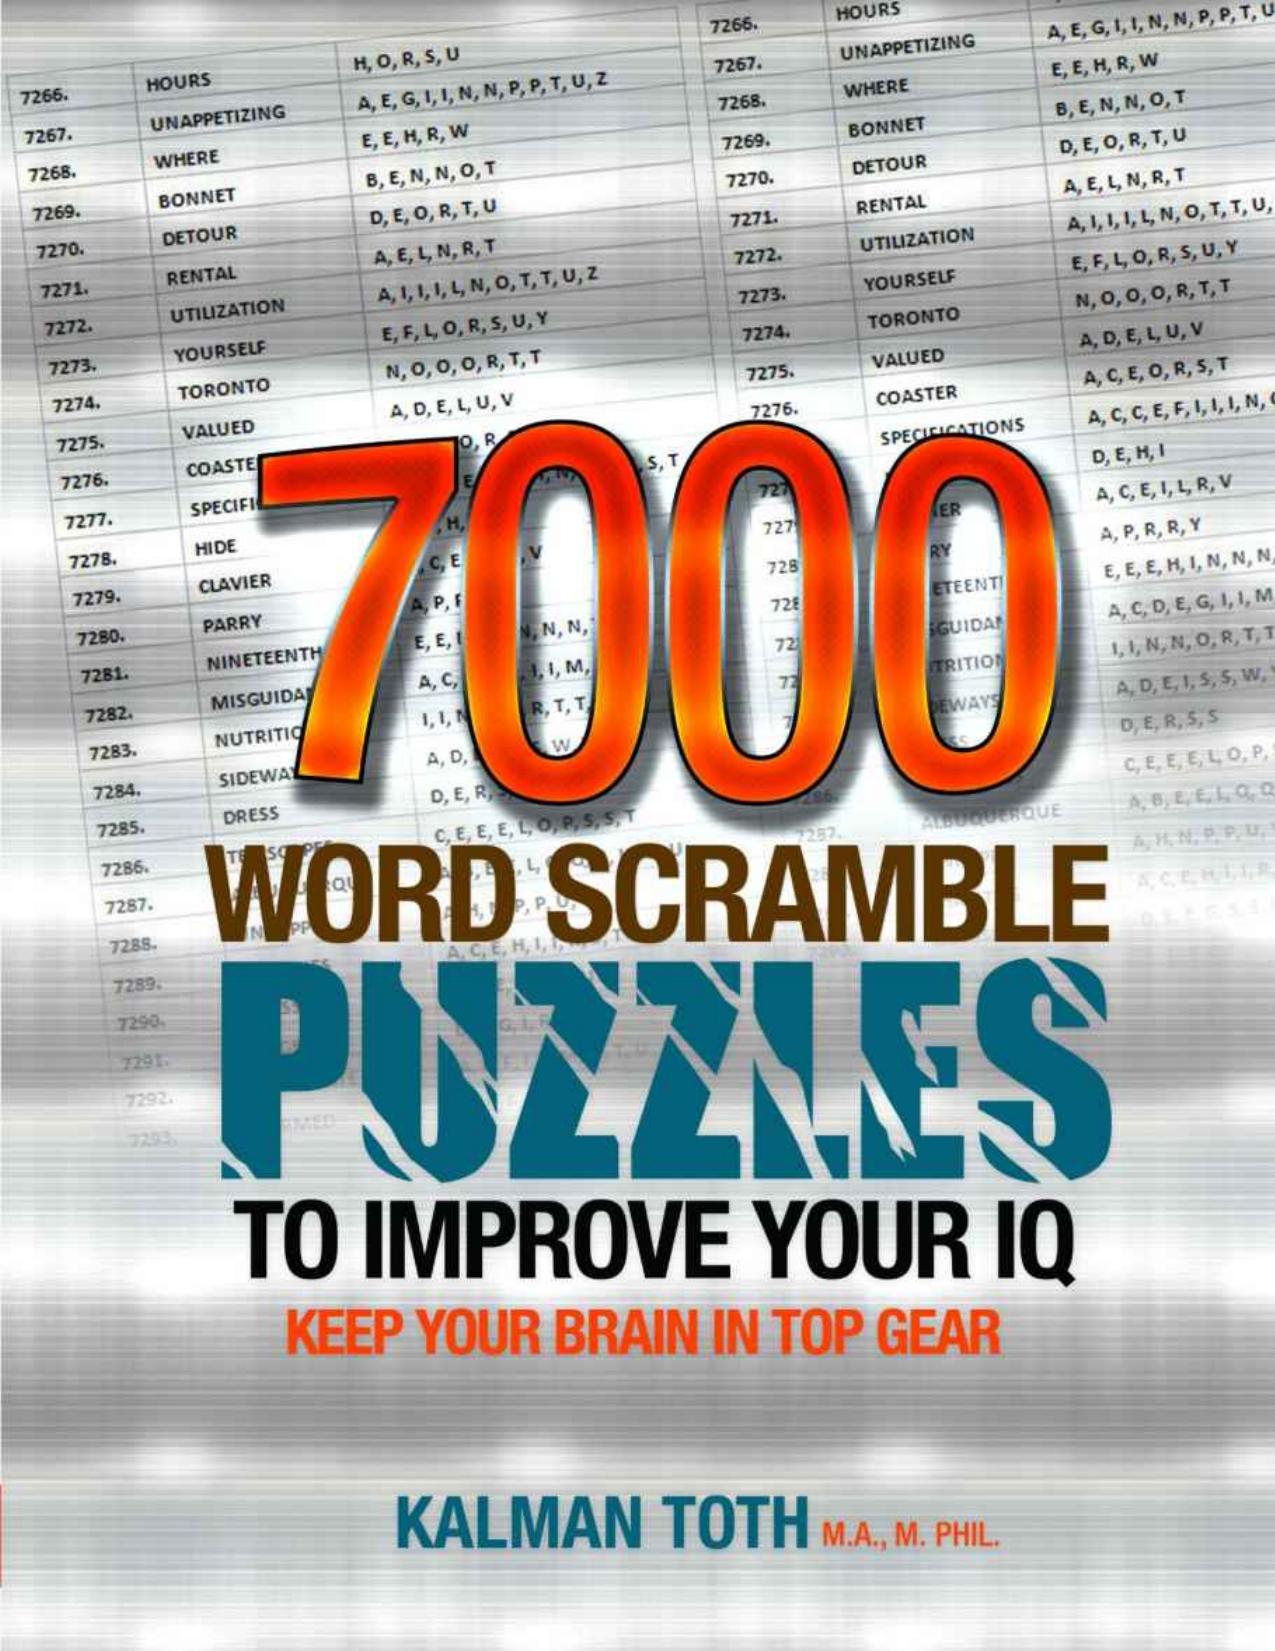 7000 Word Scramble Puzzles to Improve Your IQ by Kalman Toth M.A. M.PHIL